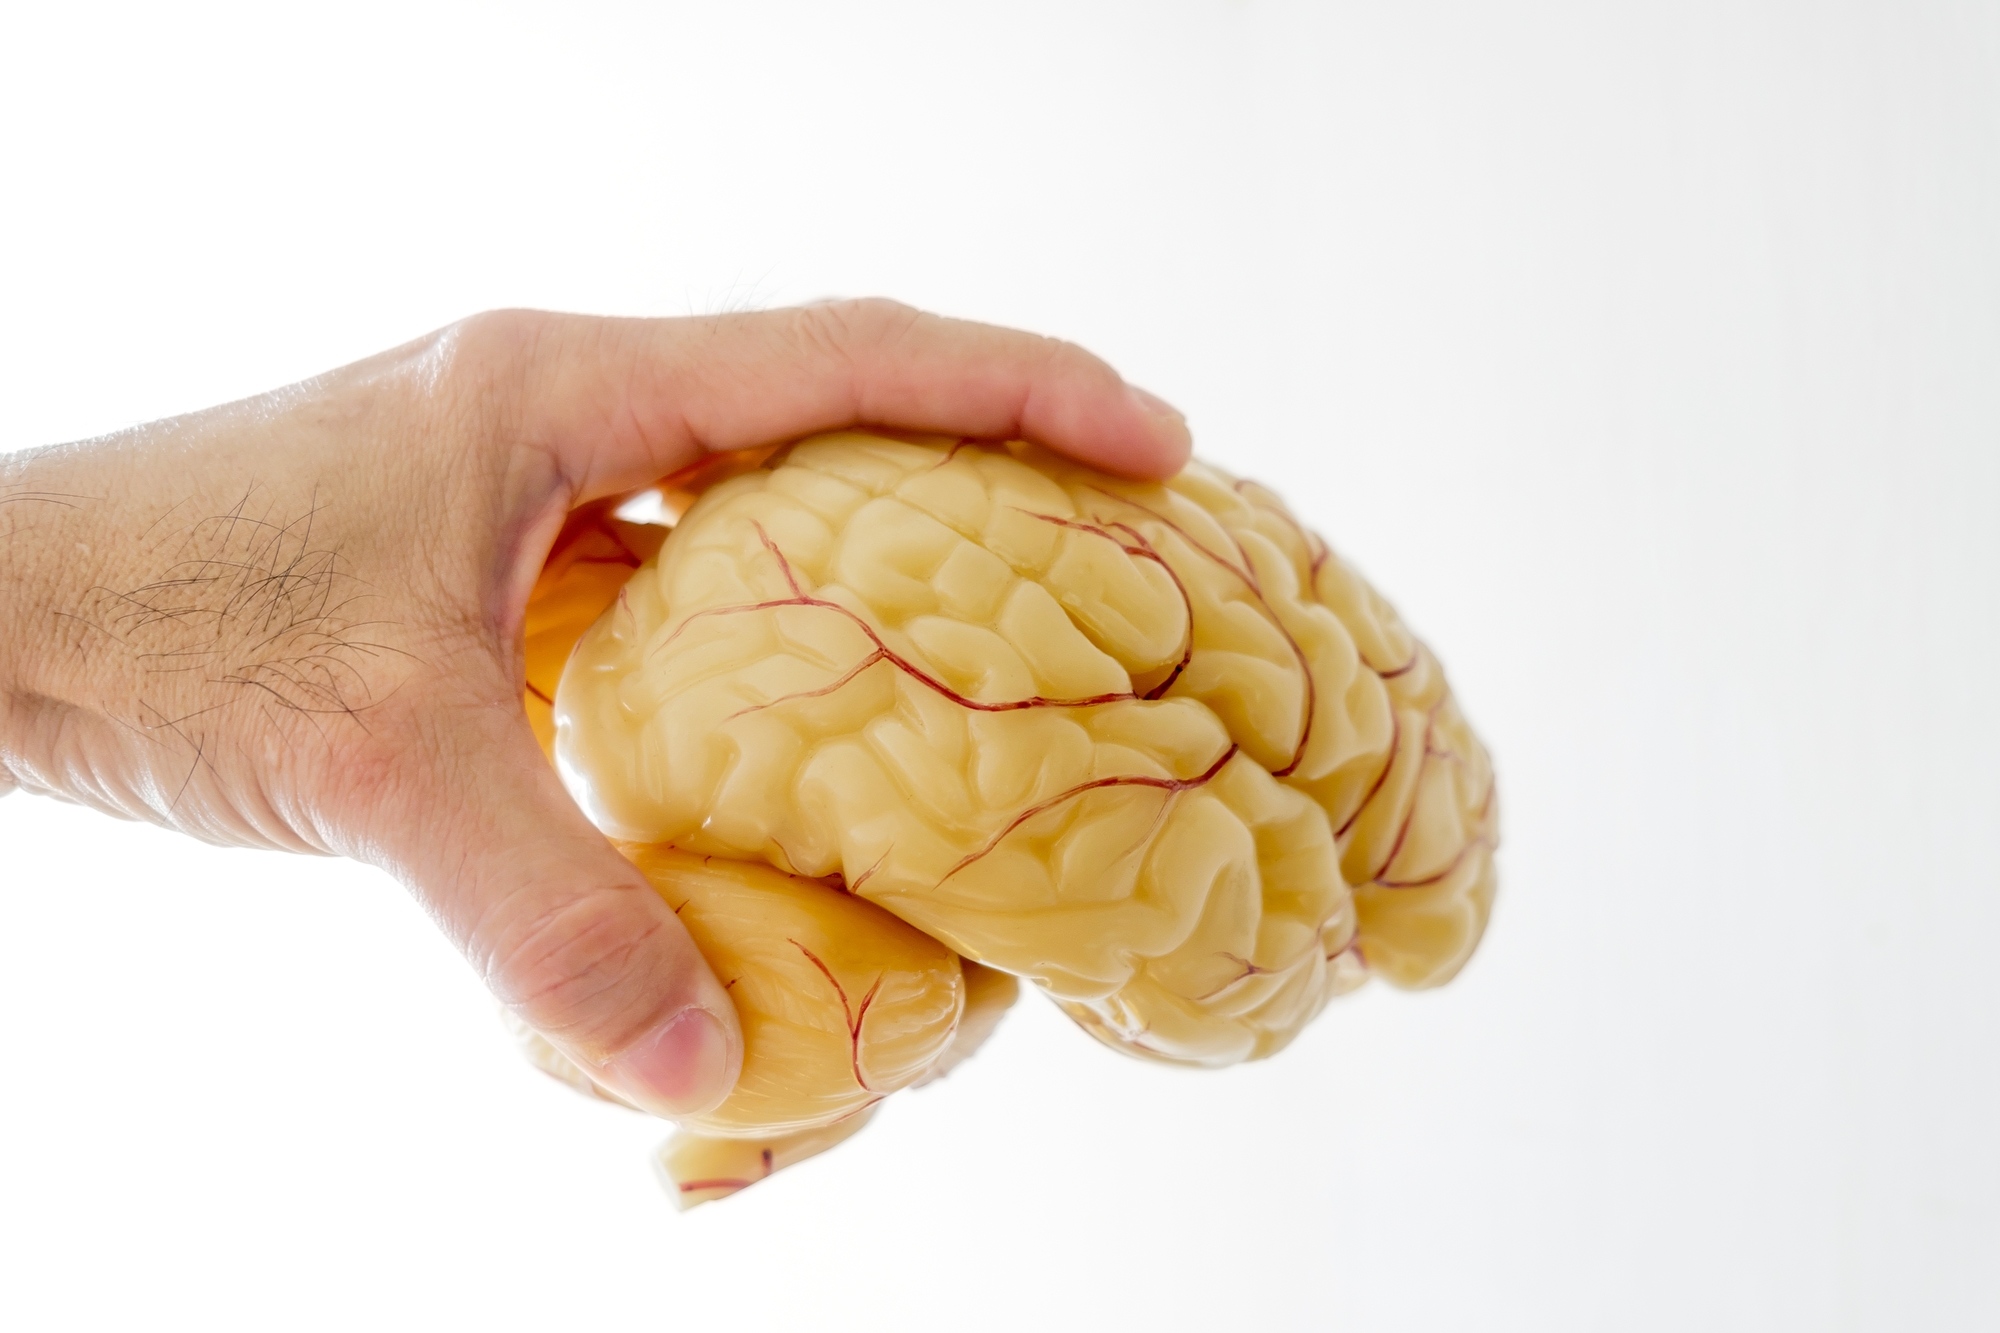 Close-up of hand picking up a human brain anatomical model